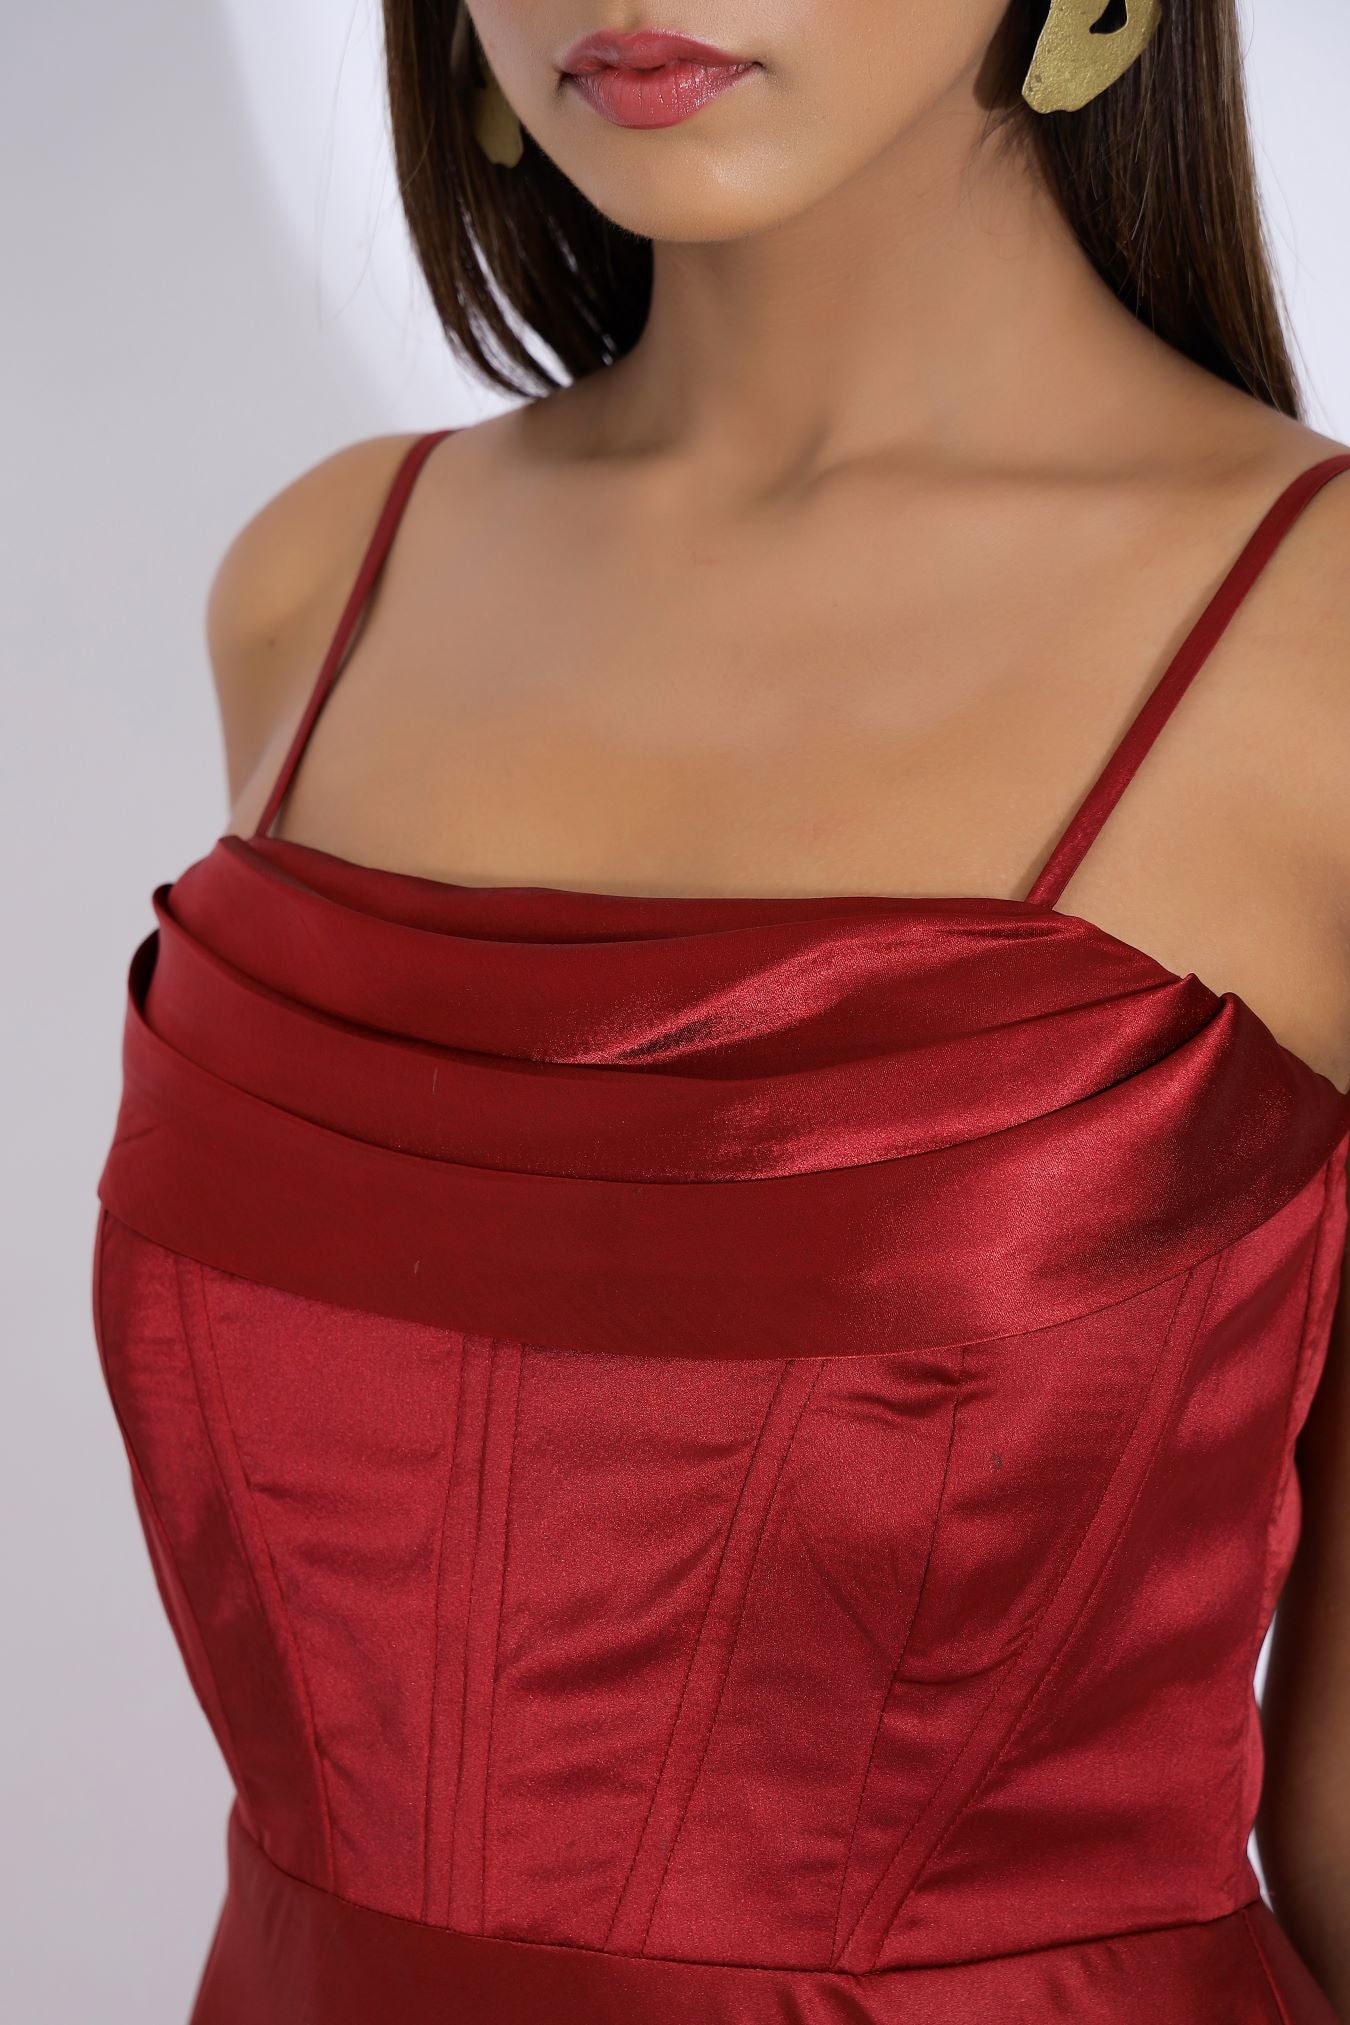 backless dress in red color